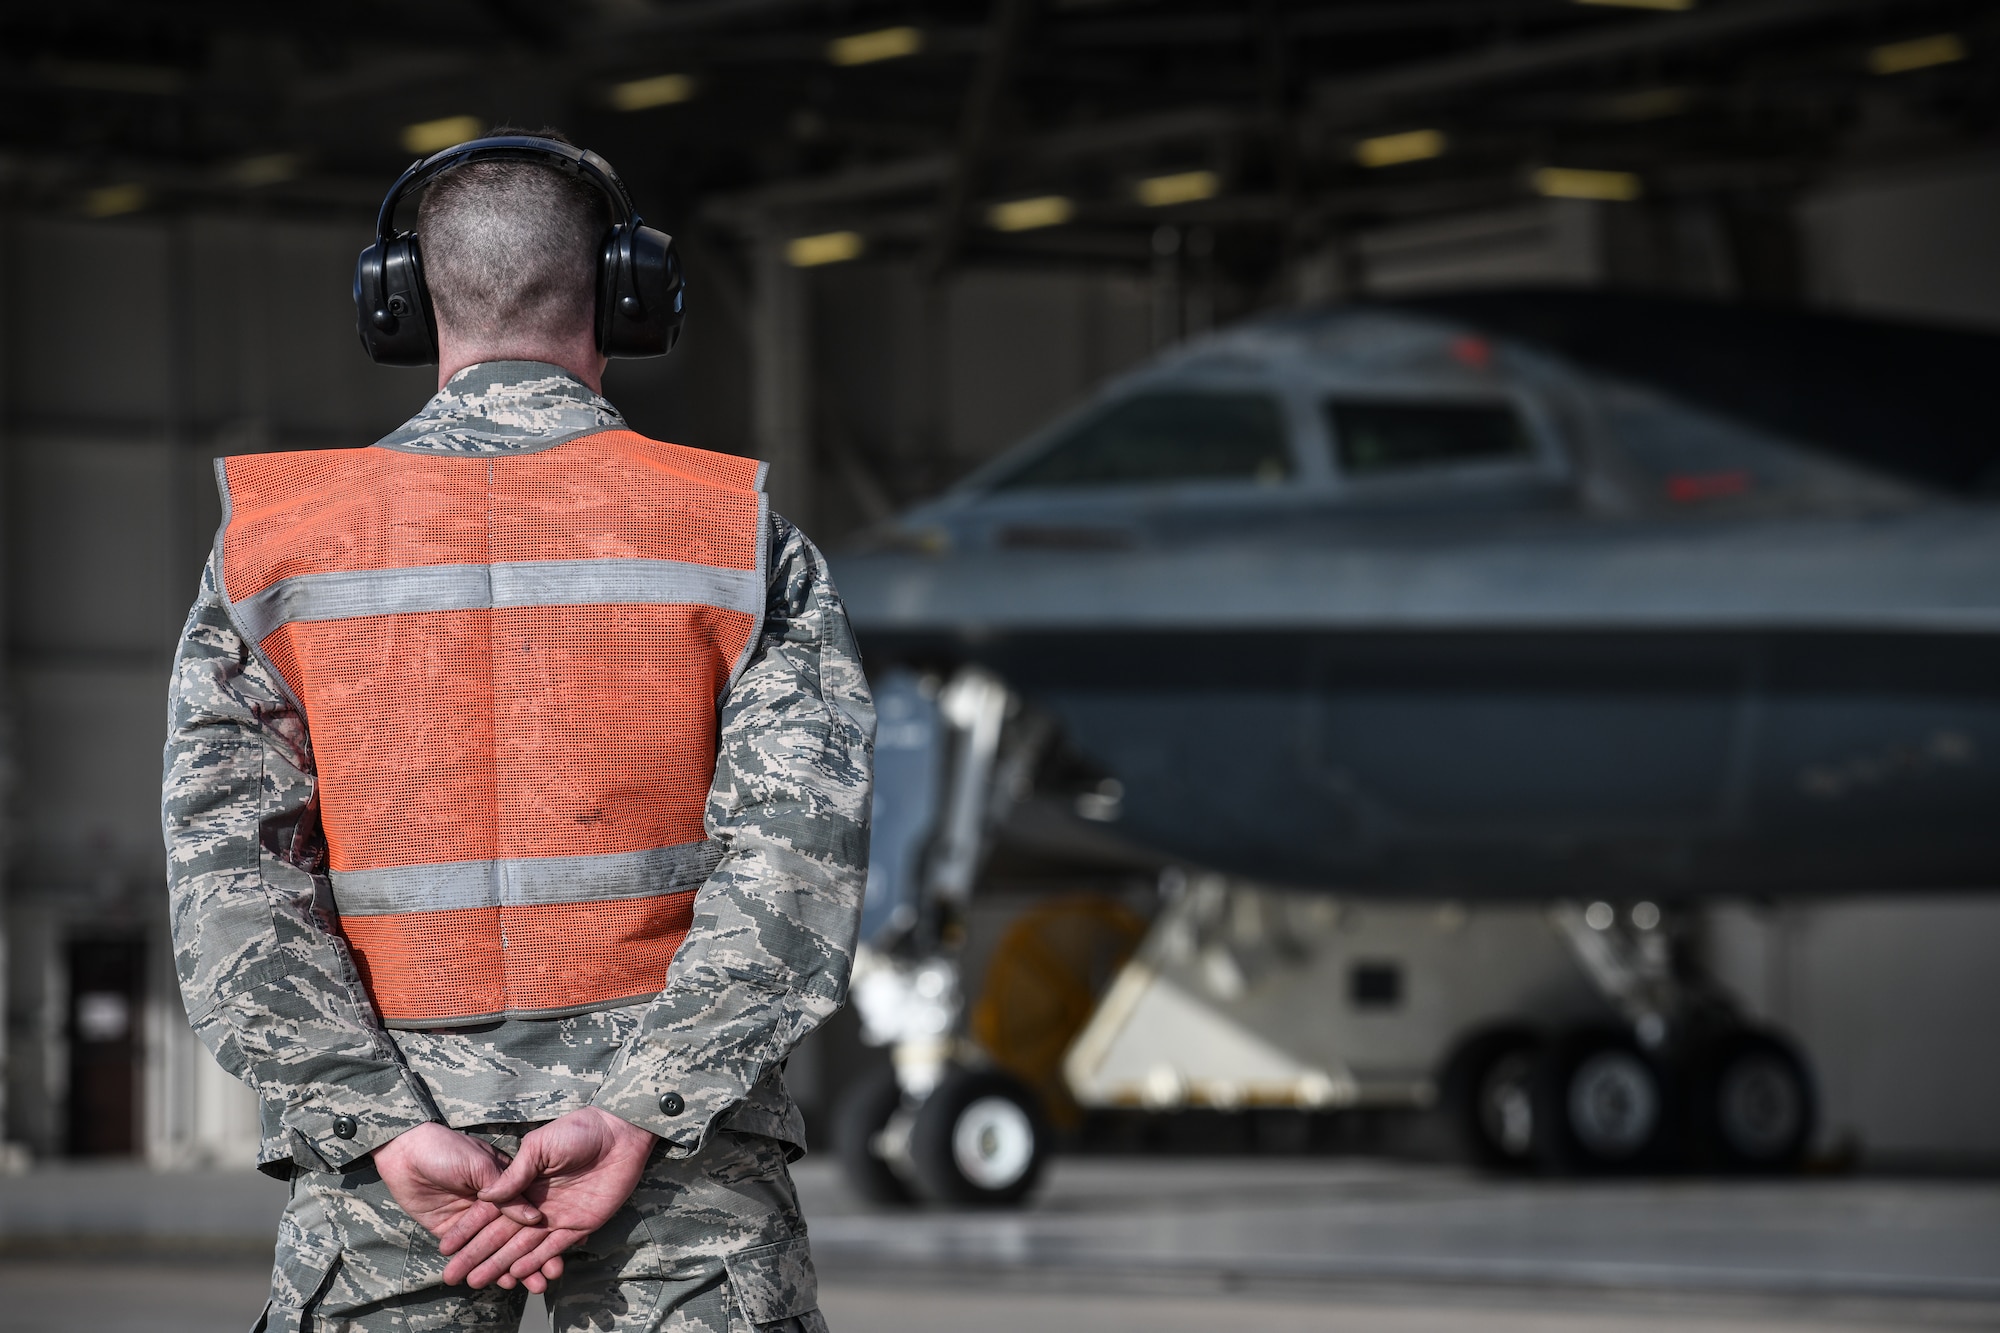 U.S. Air National Guard Staff Sgt. Larry Brown, a B-2 crew chief assigned to the 131st Aircraft Maintenance Squadron, readies a B-2 Spirit for flight at Whiteman Air Force Base, Missouri, March 8, 2020. The B-2 took off from Whiteman AFB to support U.S. Strategic Command Bomber Task Force operations in Europe. The 131st Bomb Wing is the total-force partner unit to the 509th Bomb Wing. (U.S. Air Force photo by Tech. Sgt. Alexander W. Riedel)